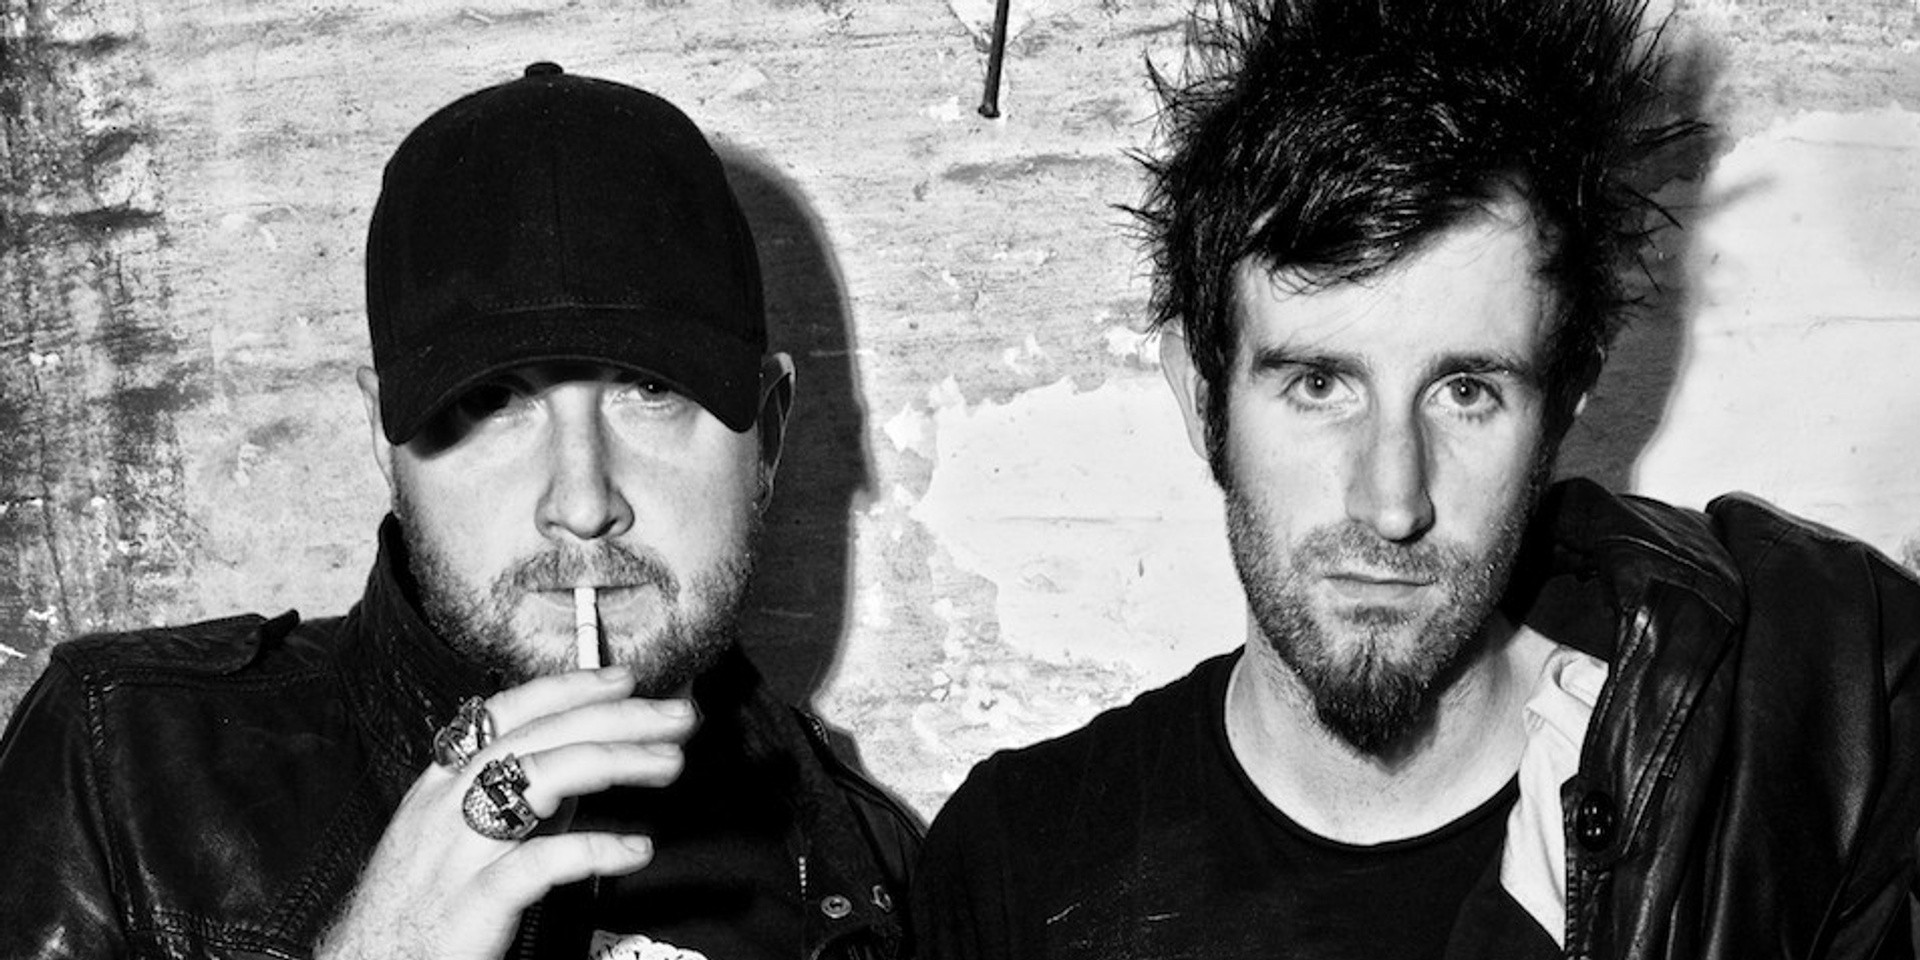 Knife Party will bring their rowdy EDM show to Singapore in June